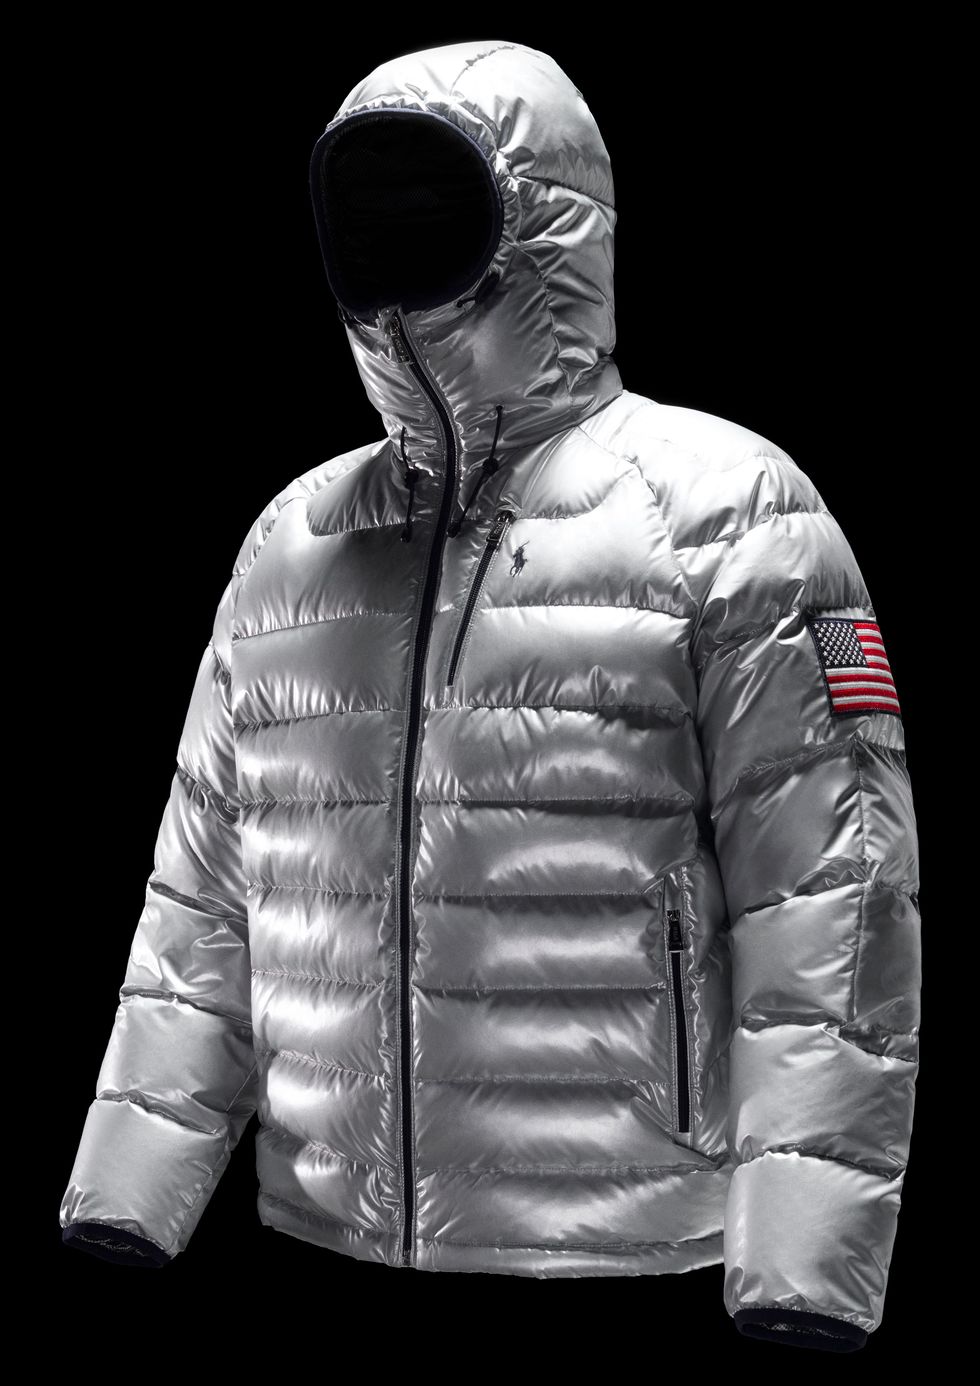 Ralph Lauren Launches Polo 11 and Glacier Jackets